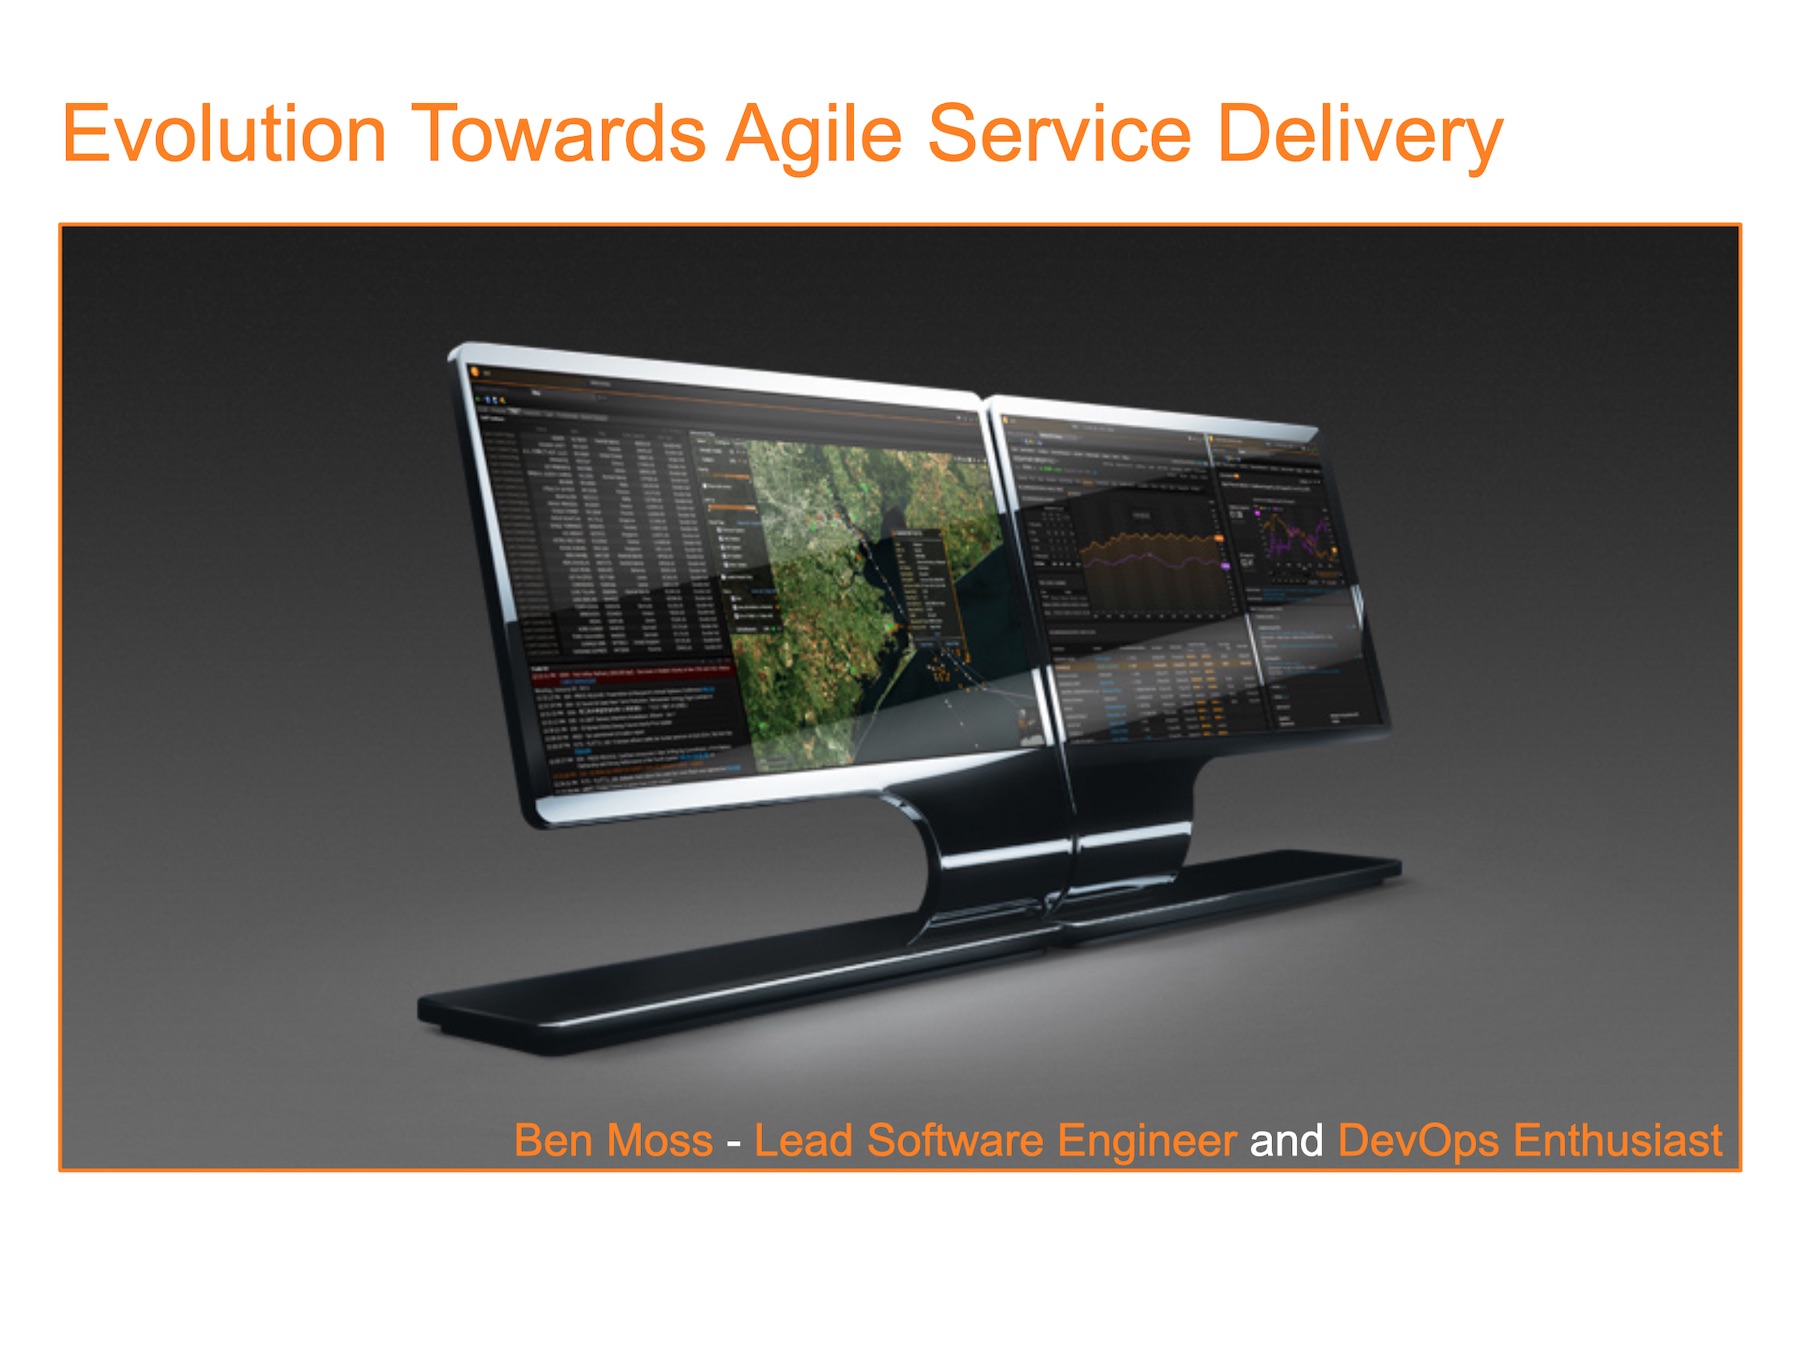 image from Evolution Towards Agile Service Delivery